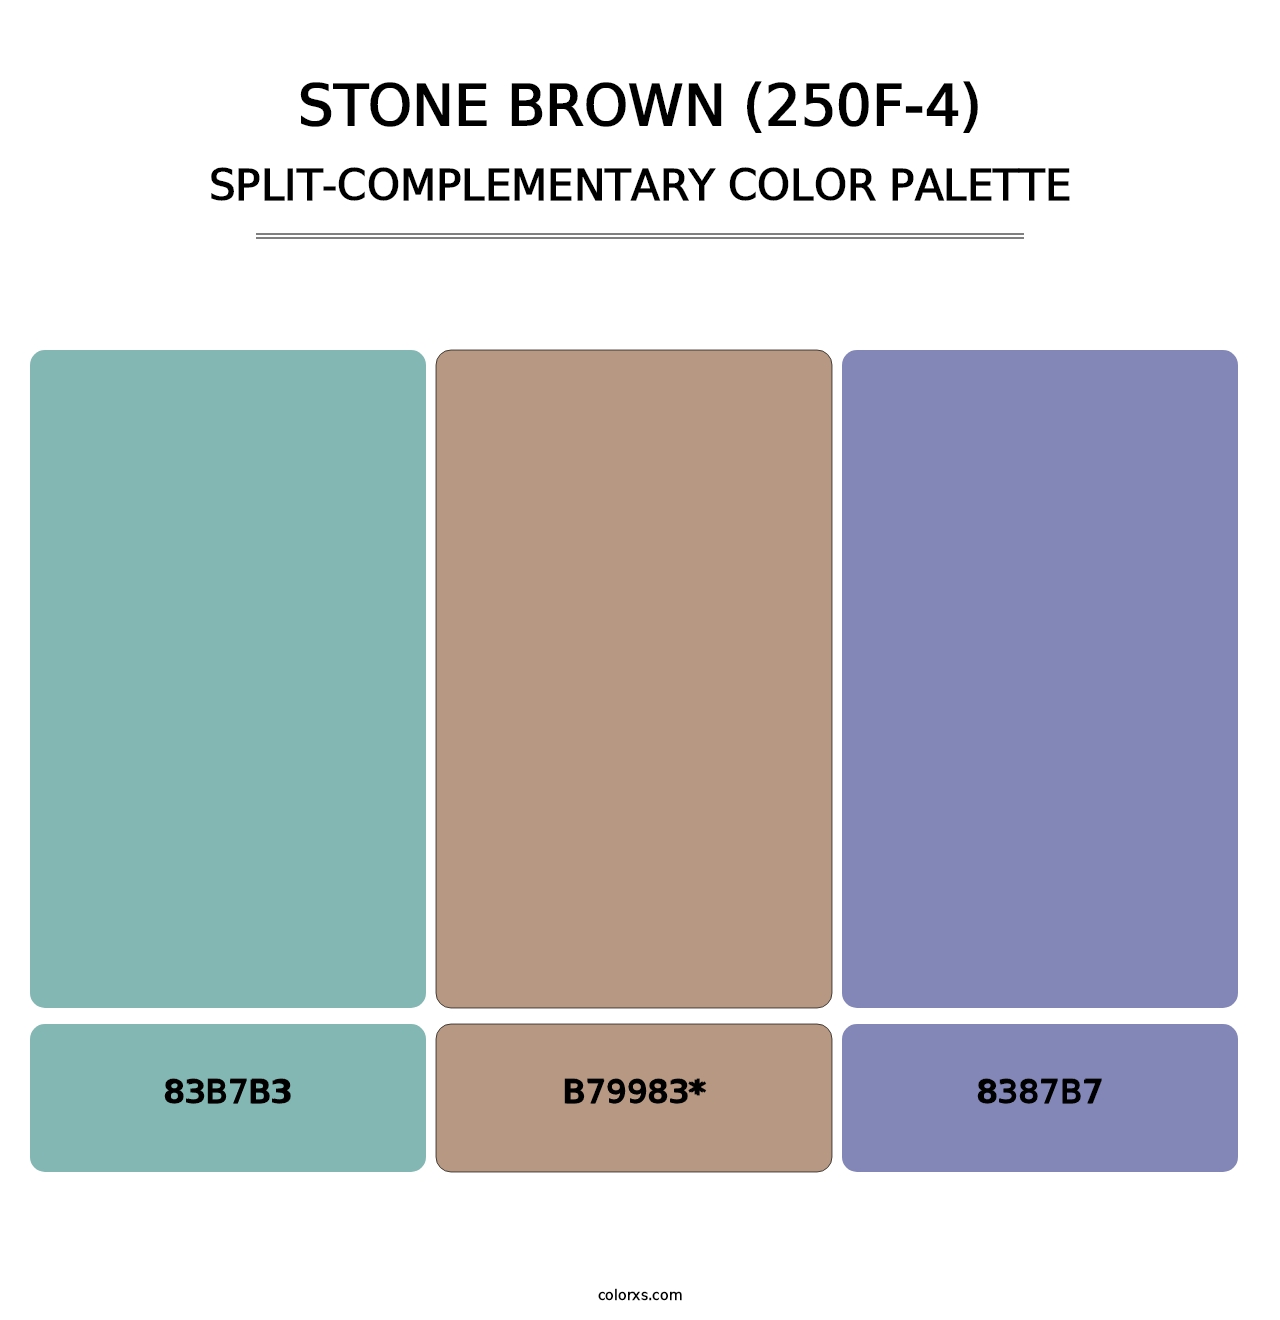 Stone Brown (250F-4) - Split-Complementary Color Palette